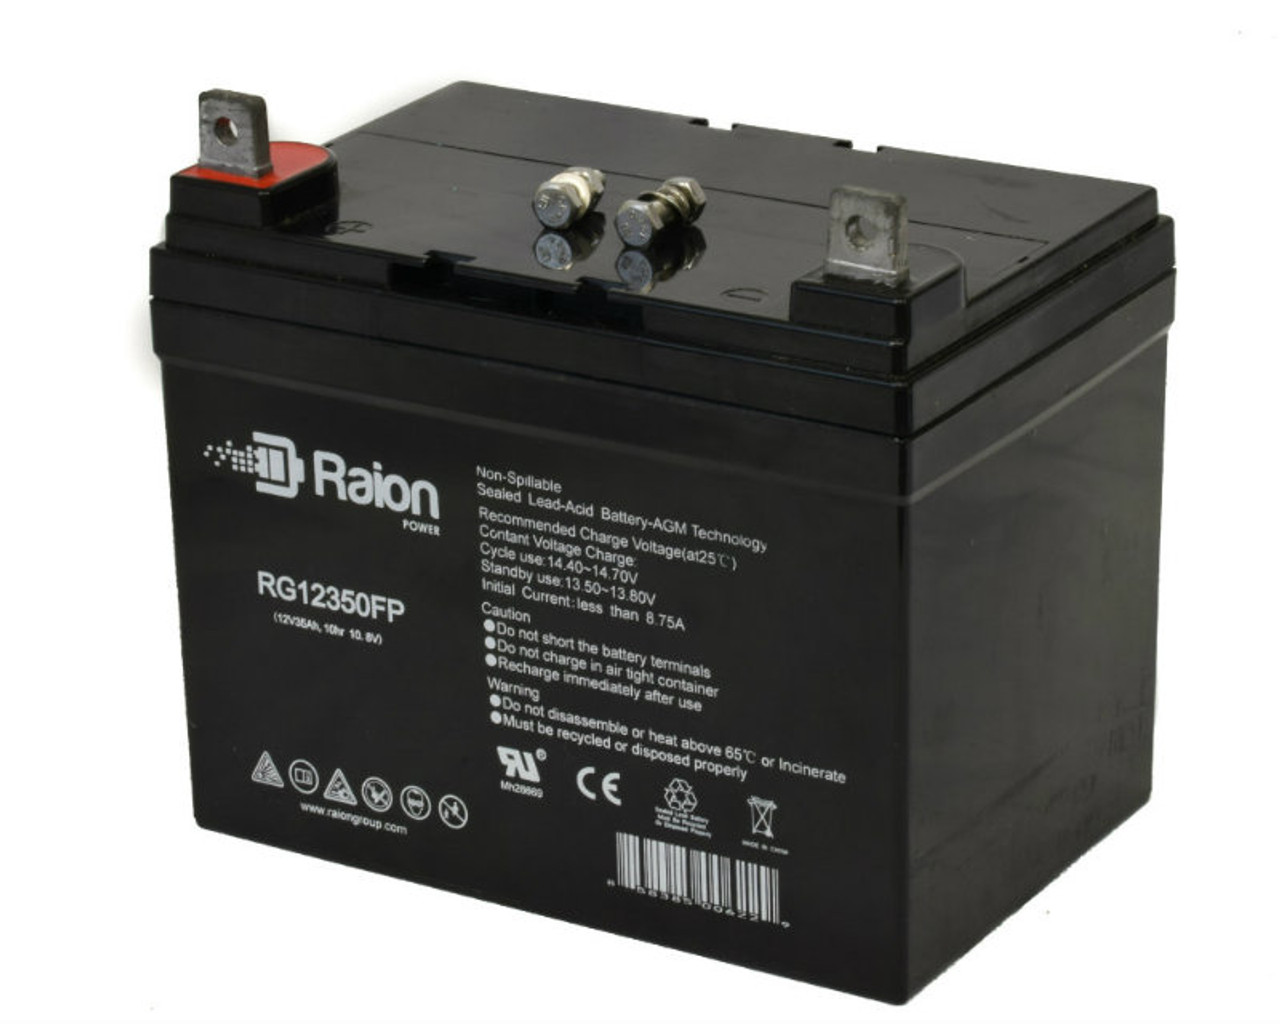 Raion Power Replacement 12V 35Ah RG12350FP Mobility Scooter Battery for Merits Health Products MP1IN